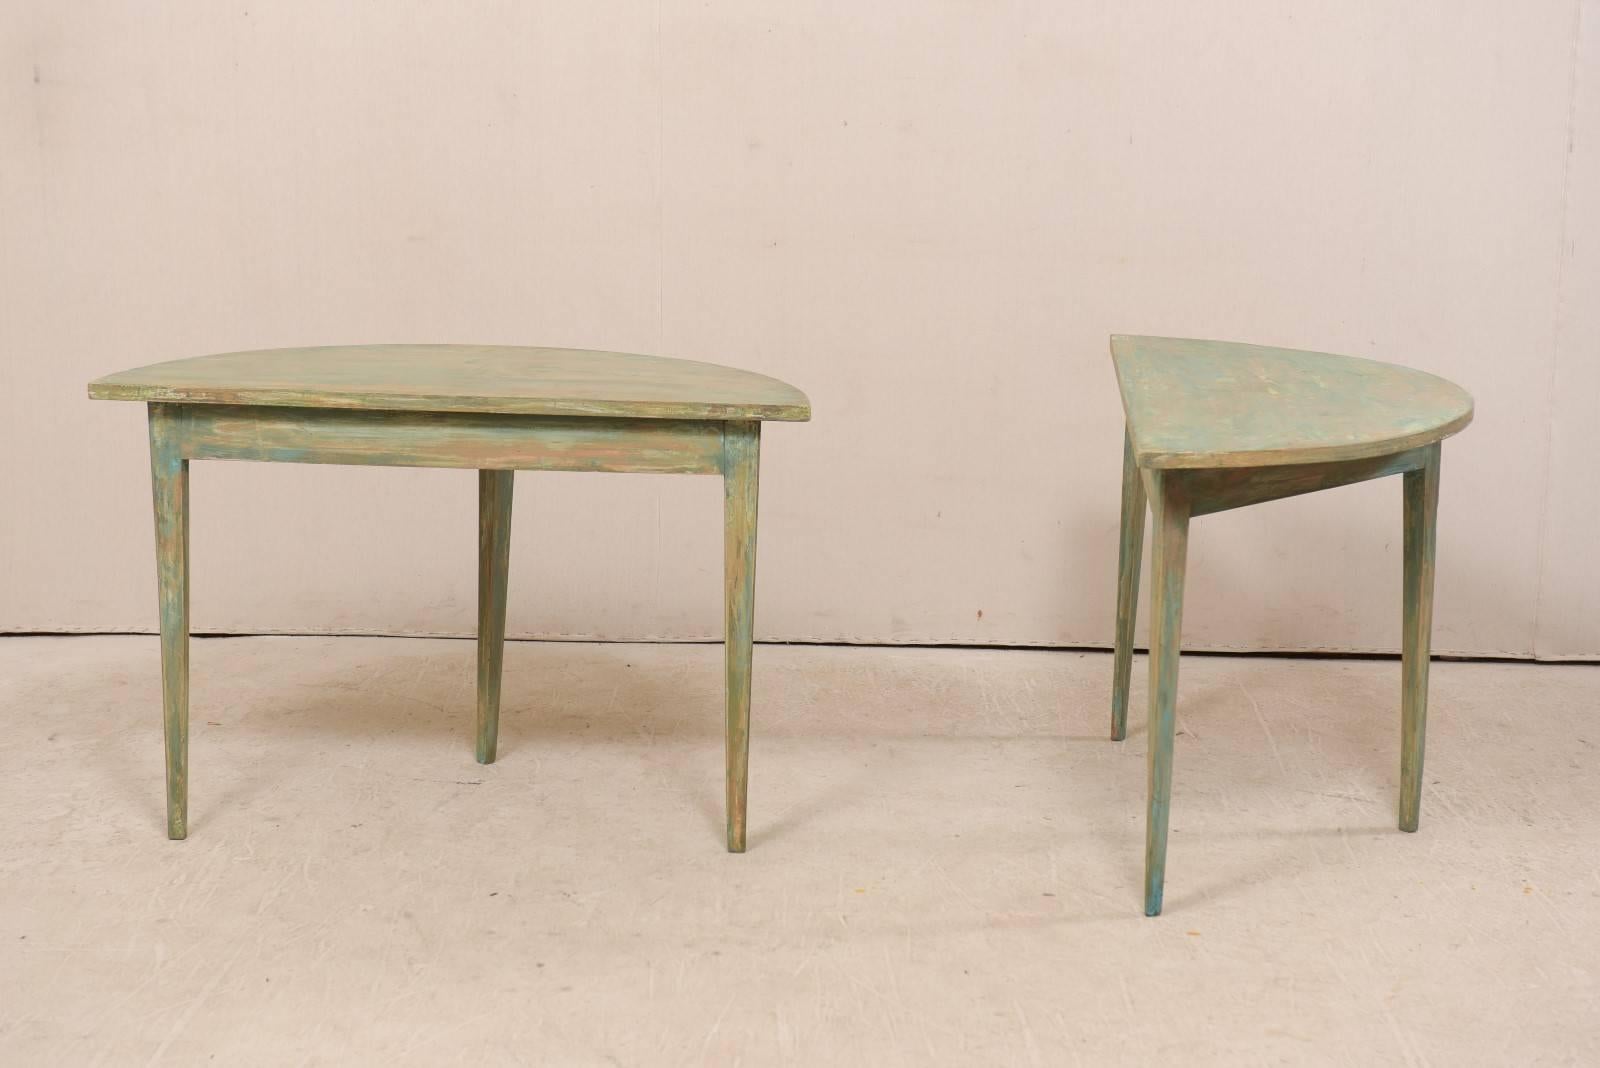 Pair of Swedish 19th Century Painted Wood Demilune Tables with Tapered Legs 1